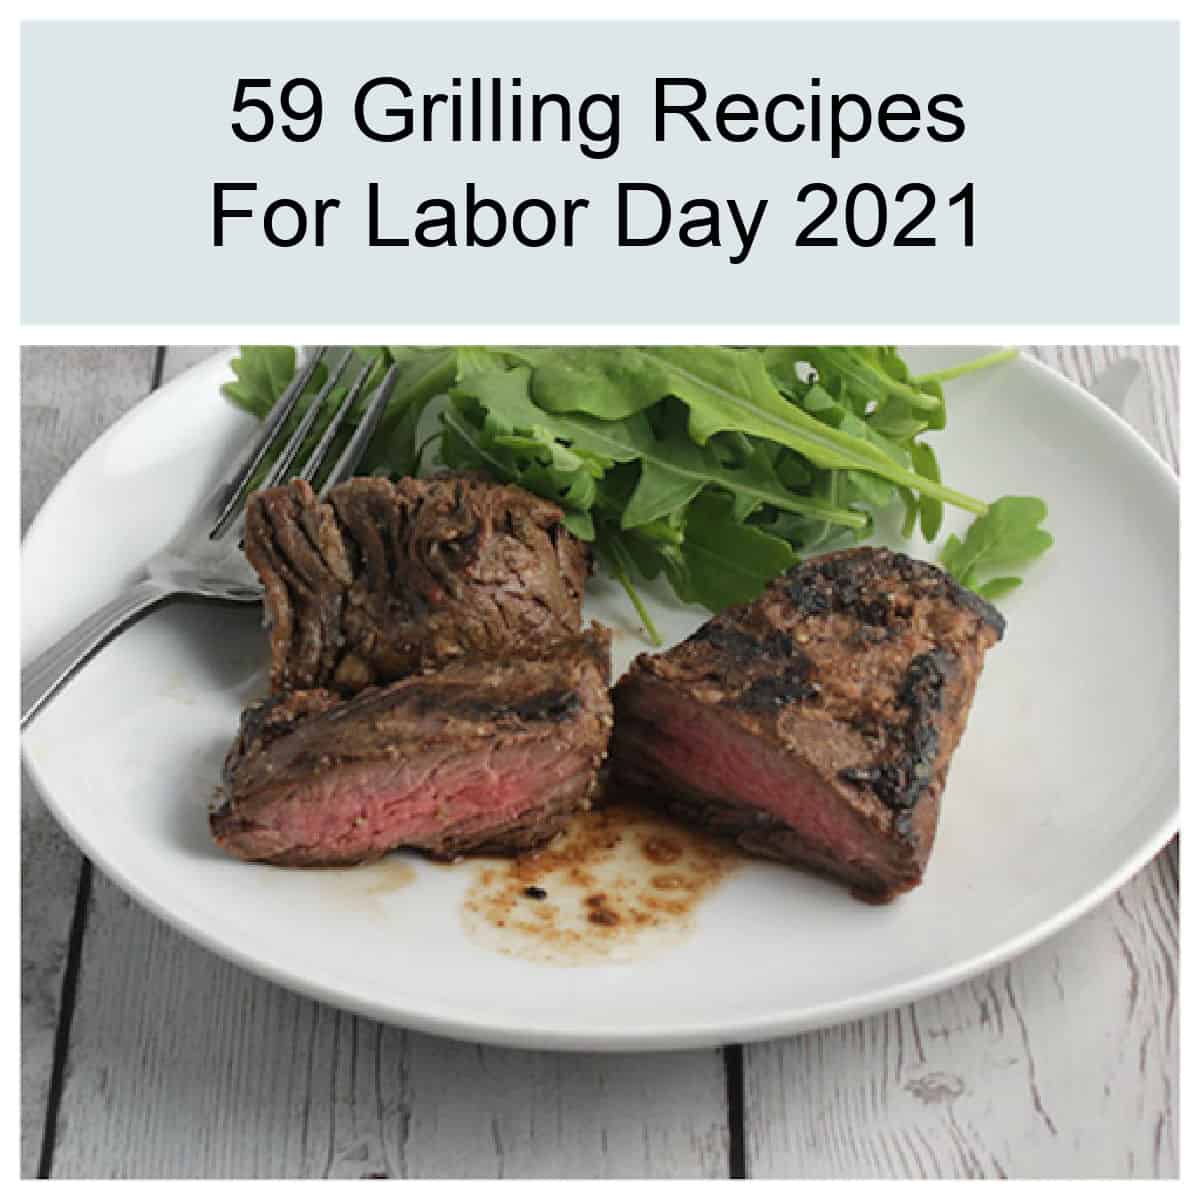 picture of grilled steak tips on a white plate with text above it that says 59 Grilling Recipes for Labor Day 2021